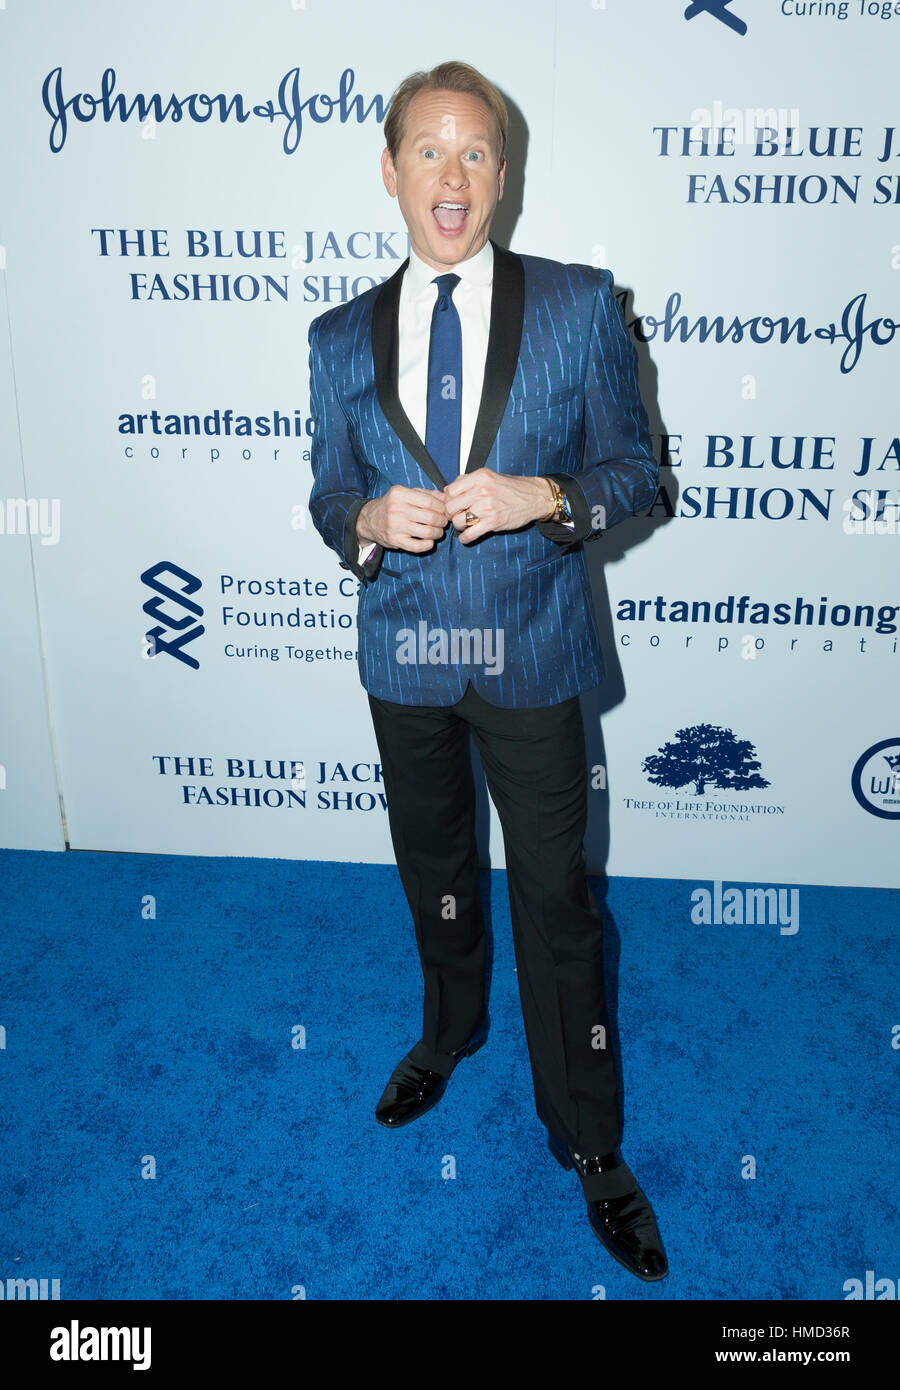 New York, United States. 01st Feb, 2017. Carson Kressley attends the blue jacket fashon show in support for prostate cancer awarness during New York Fashion week at Pier 59 Credit: Lev Radin/Pacific Press/Alamy Live News Stock Photo